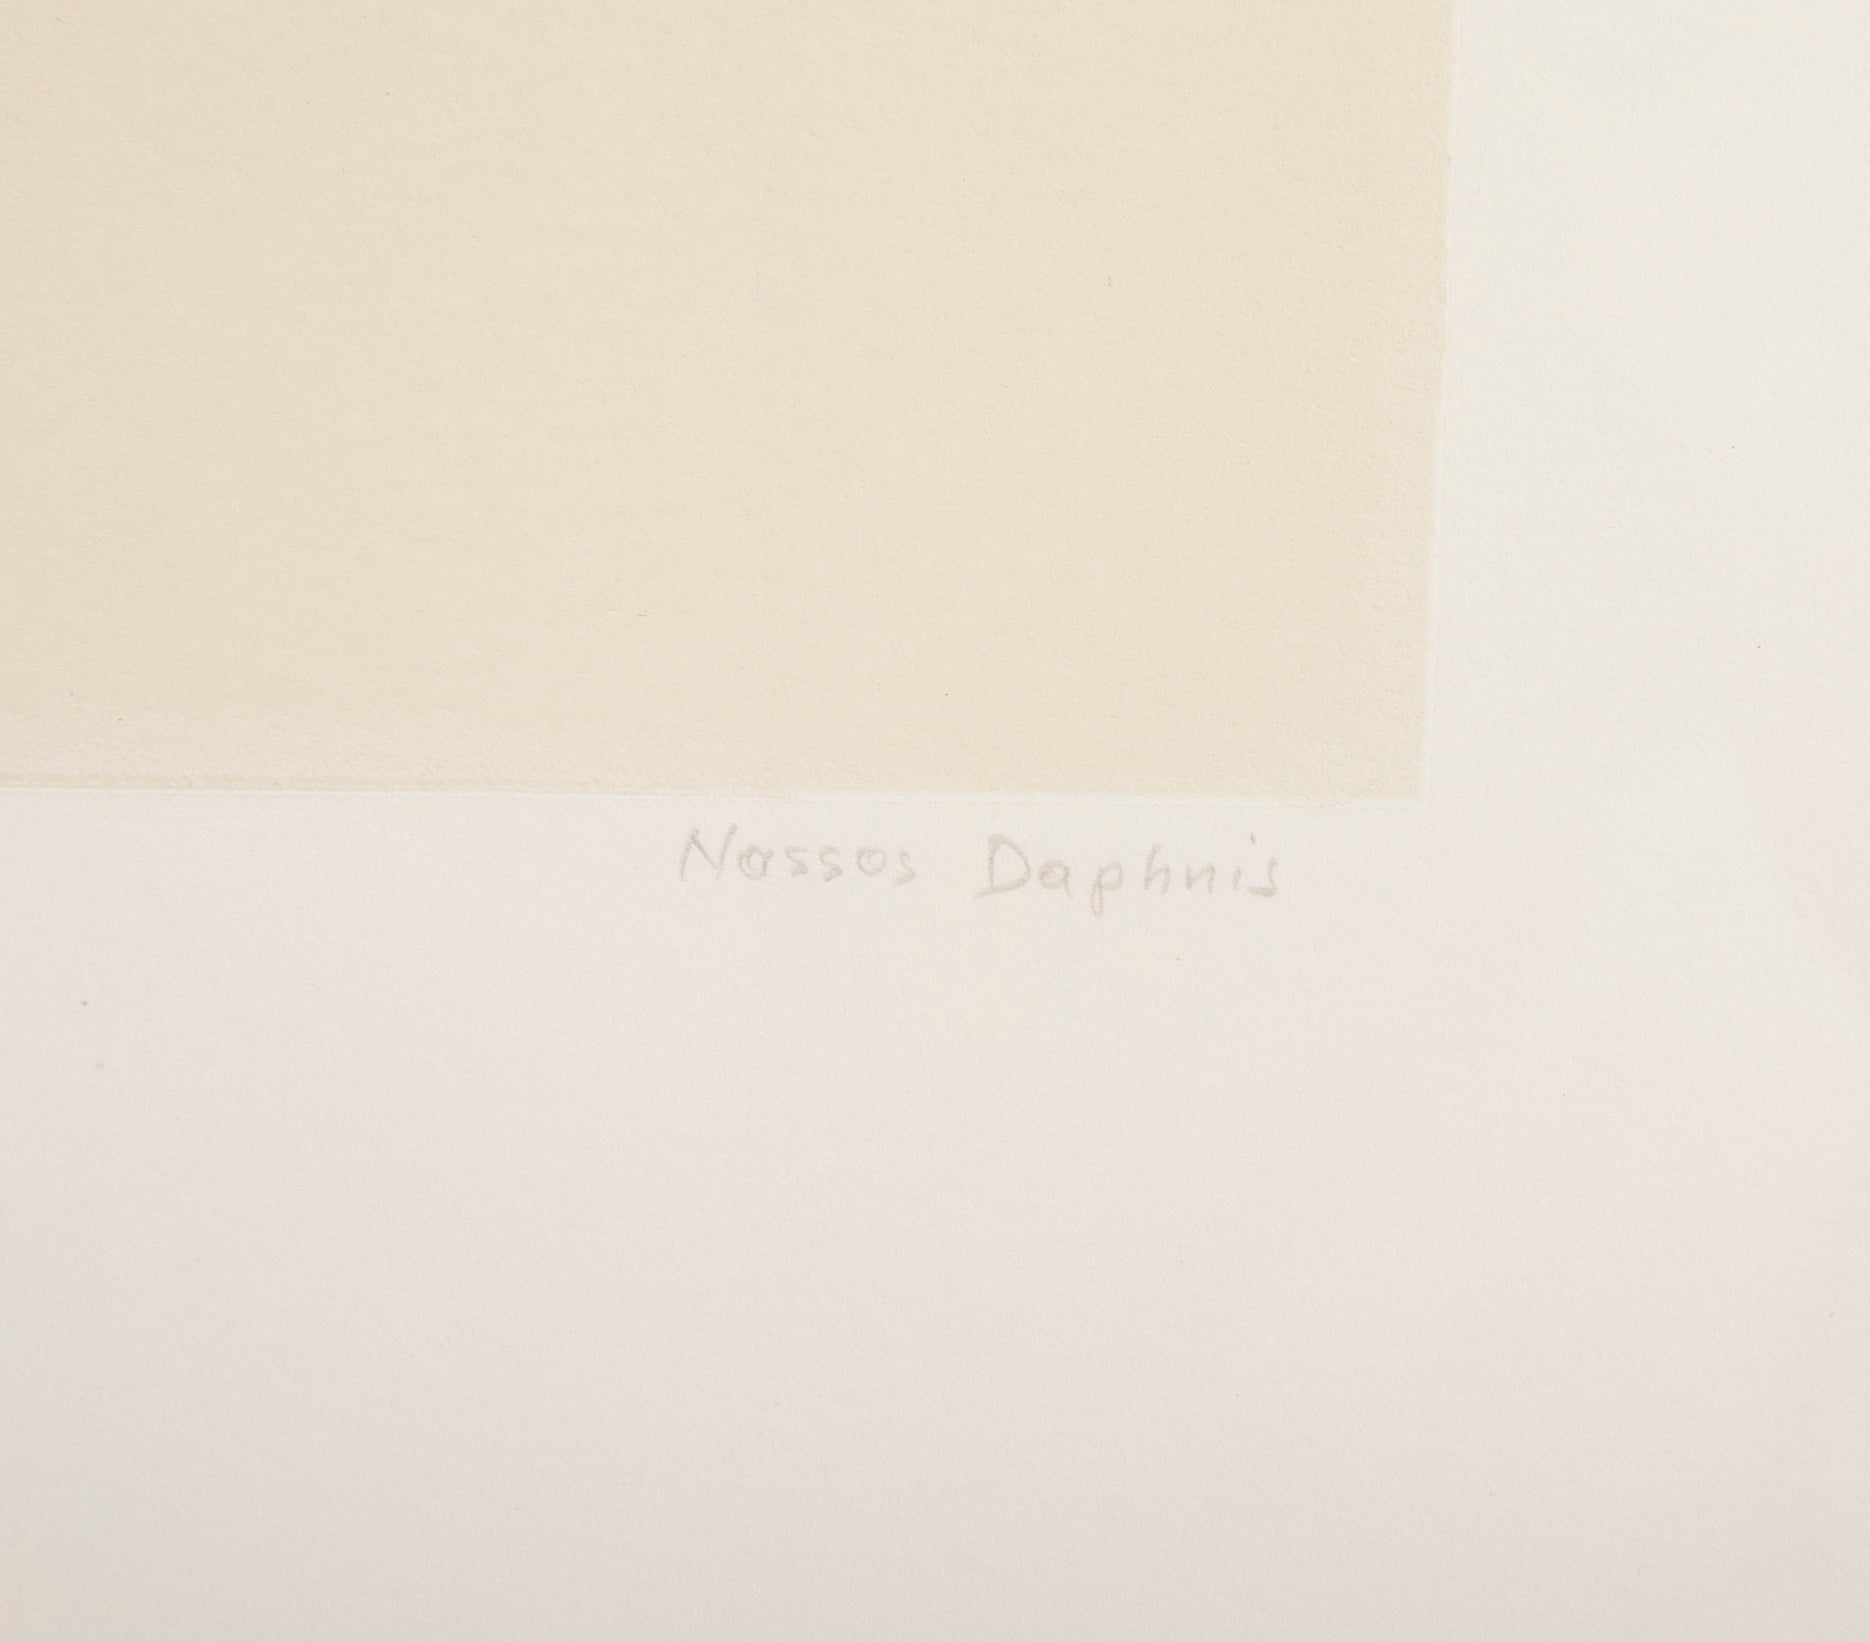 Set of Two Signed & Numbered Silkscreens by Nassos Daphnis